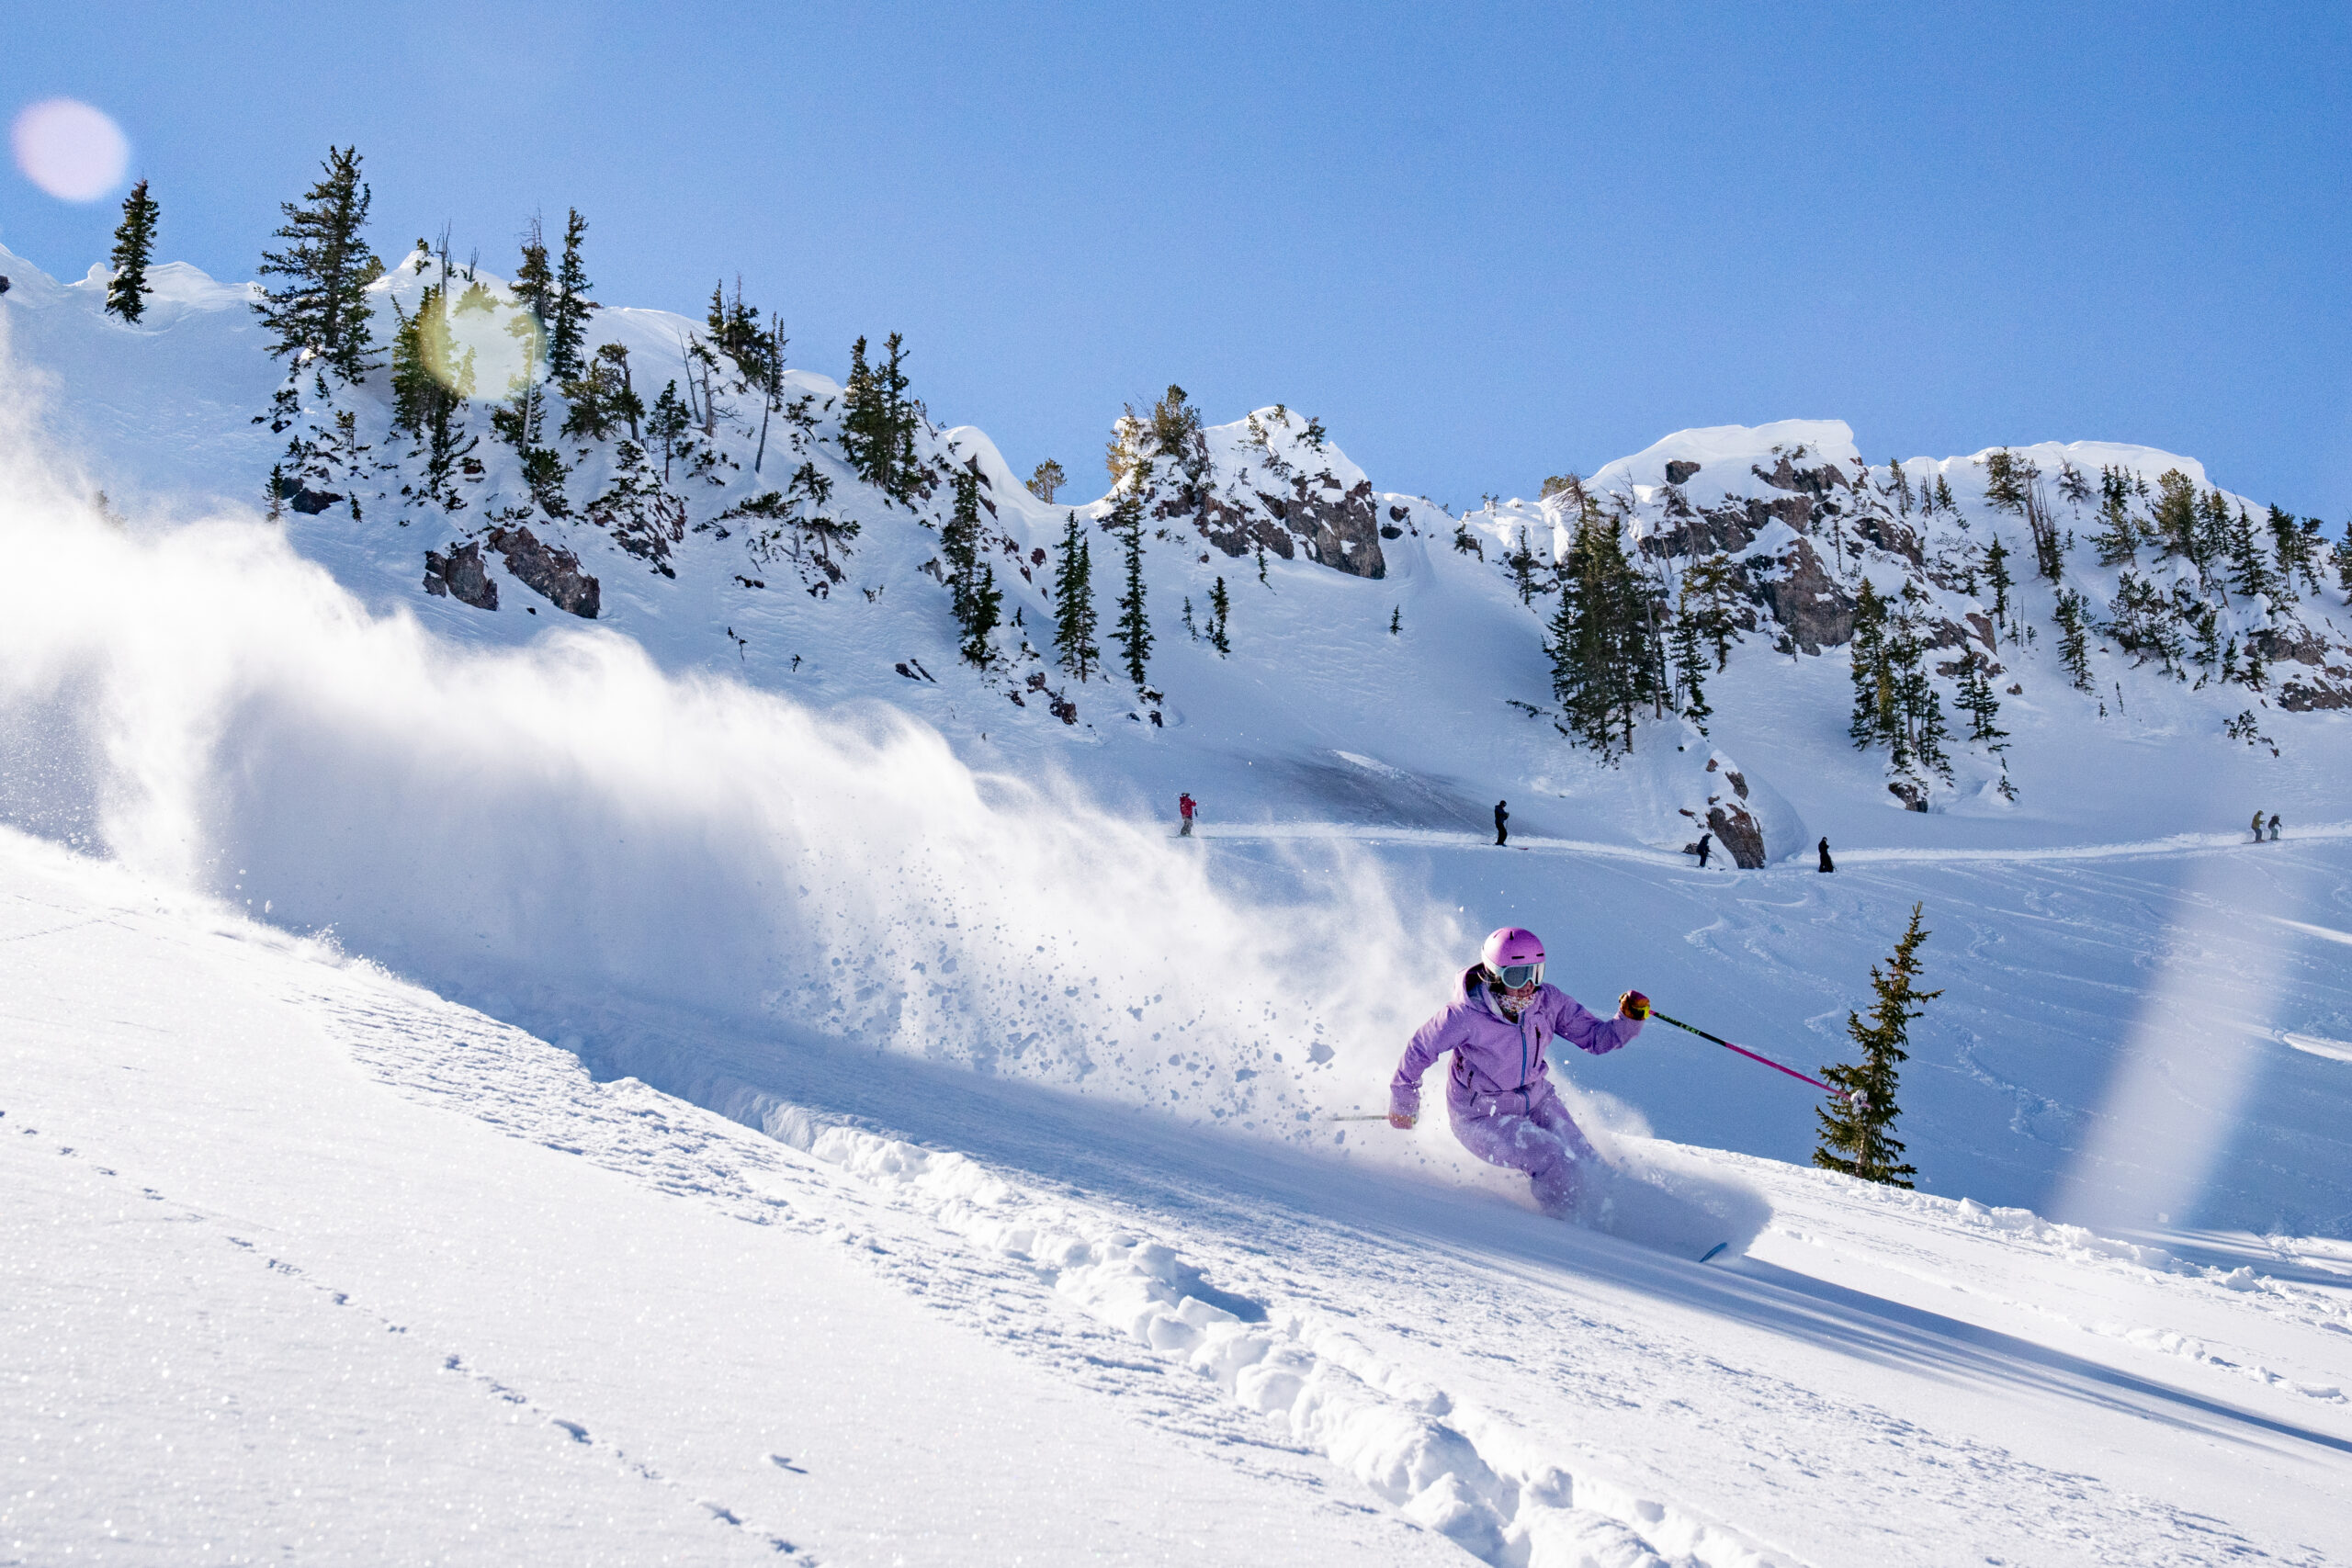 The Best Ski Runs In and Around Park City, From Beginner to Expert